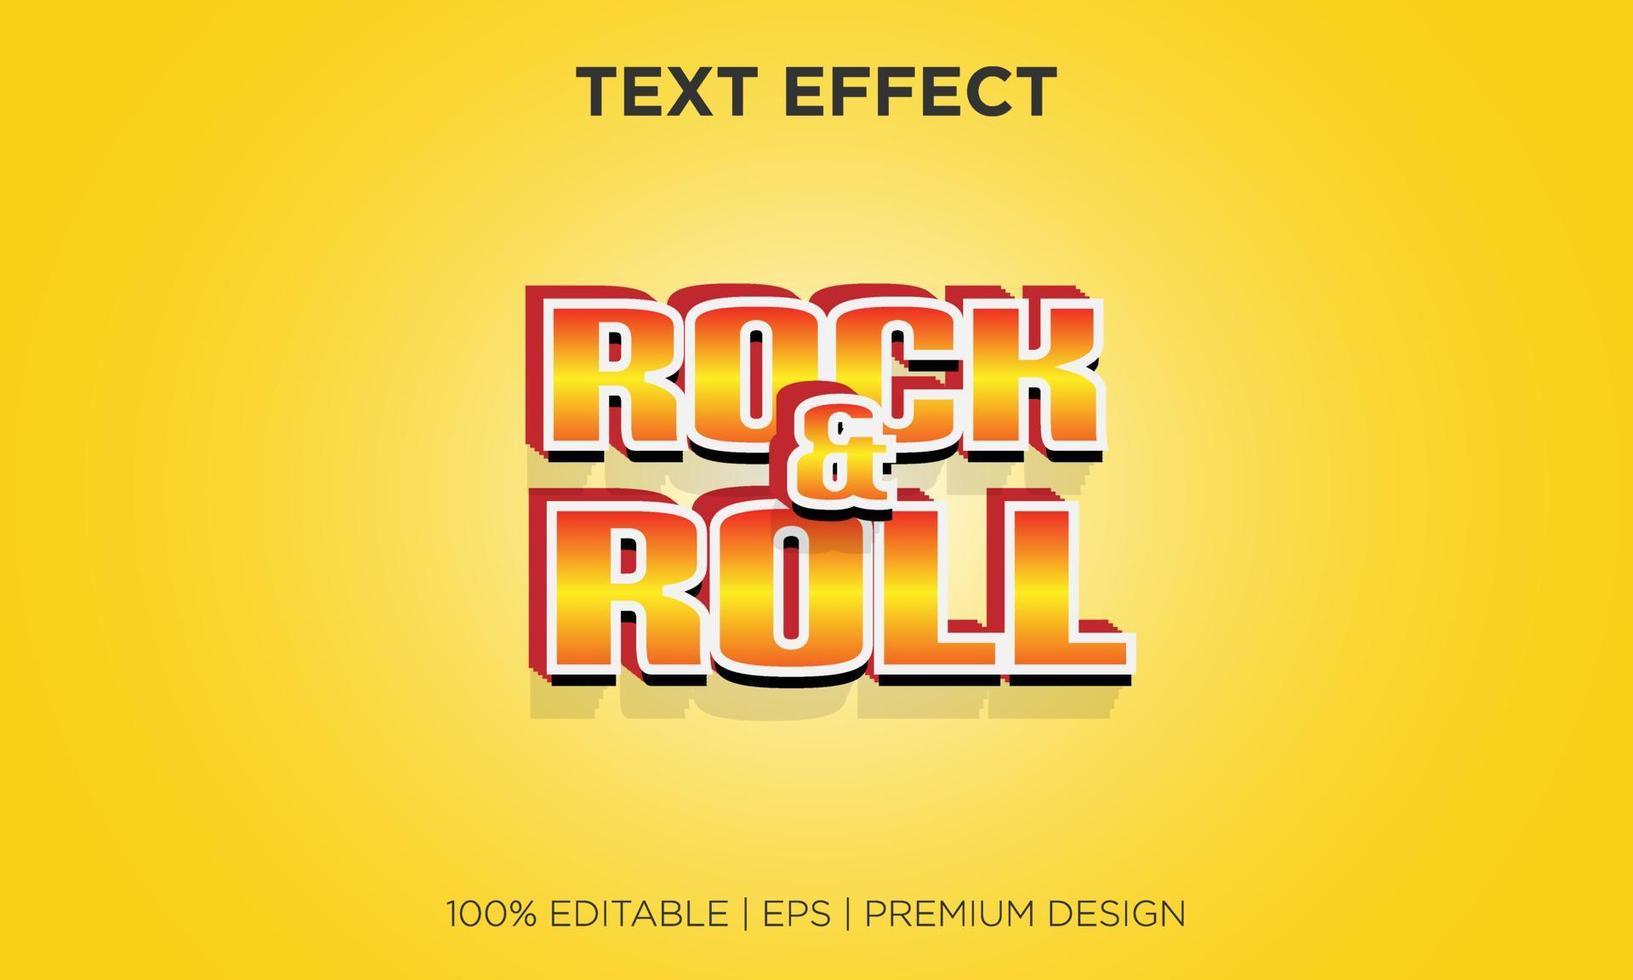 text effect editable style rock and roll vector